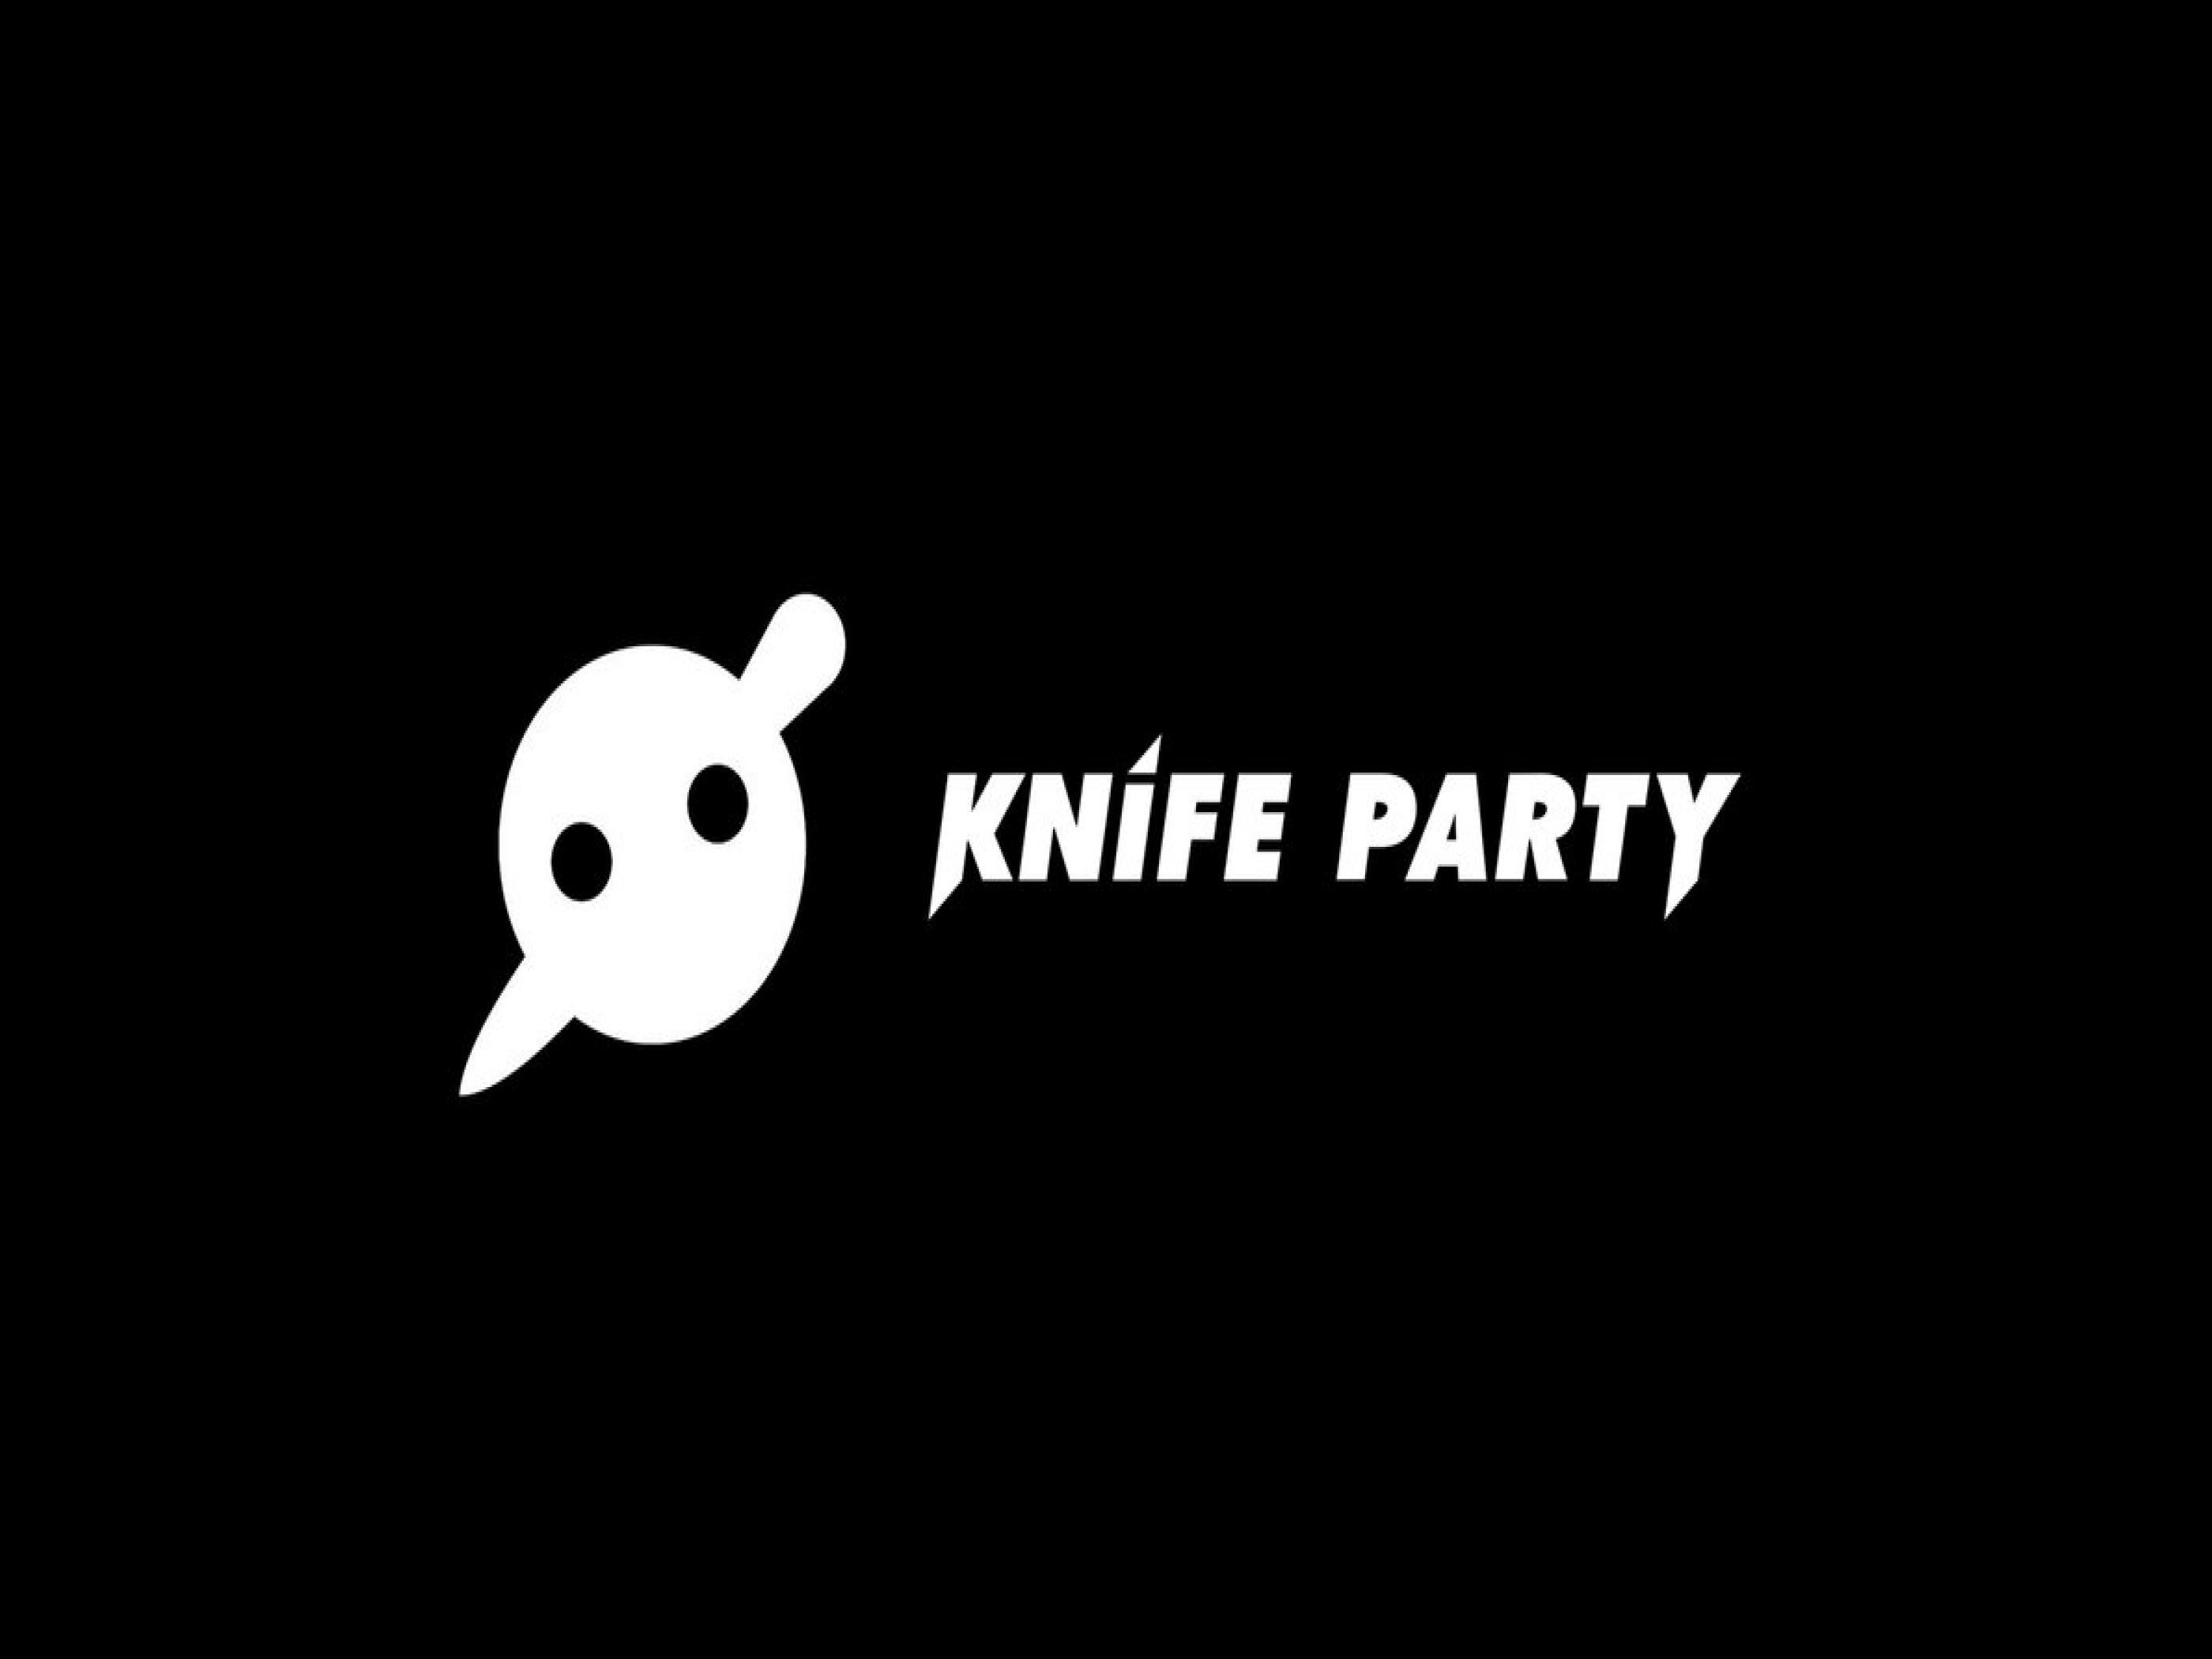 Knife Party Wallpaper Full HD VO1O91